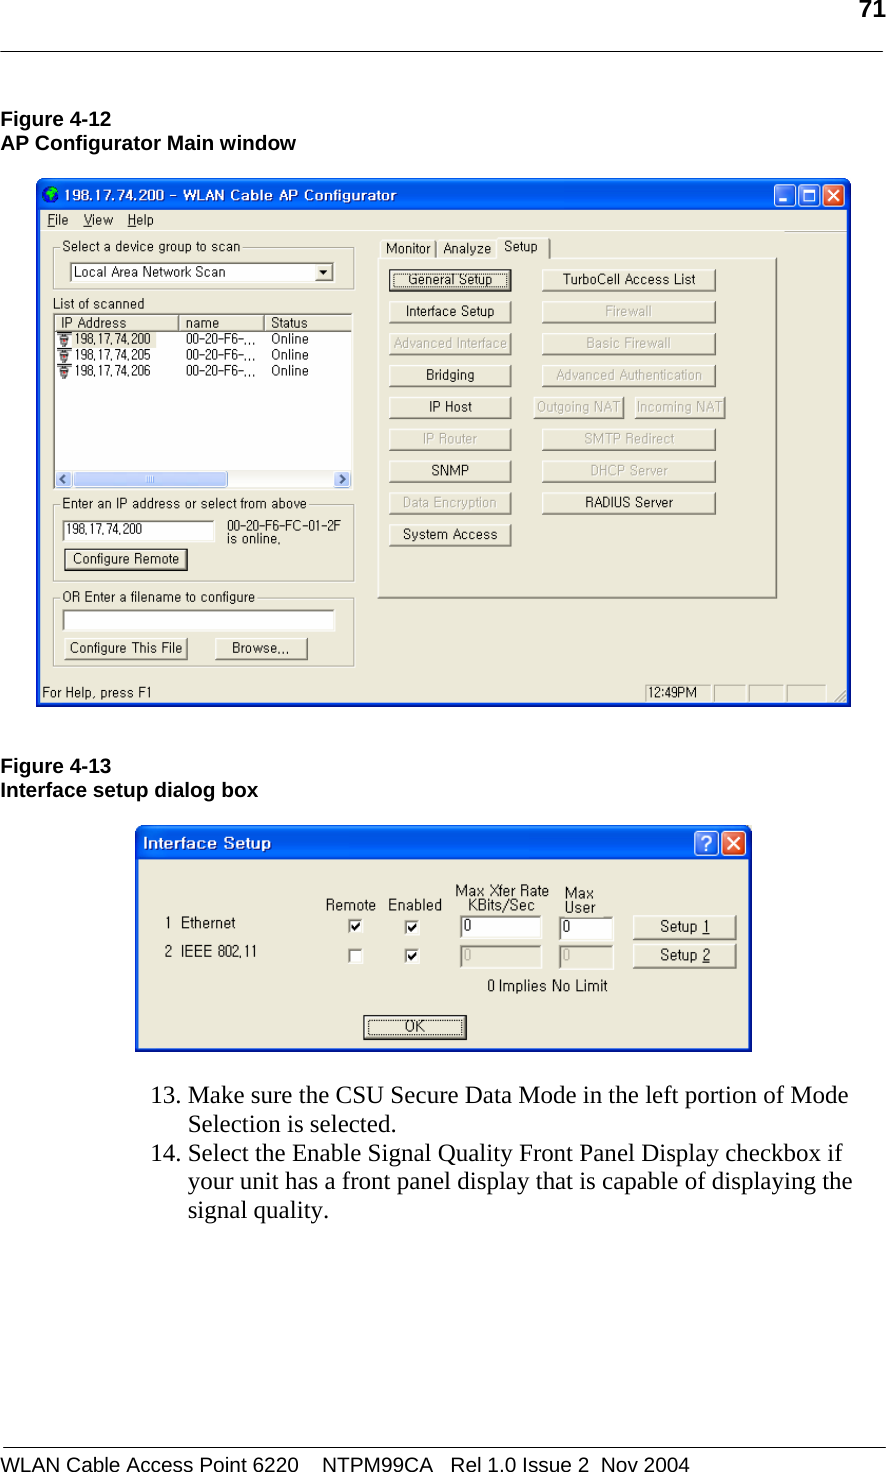   71  WLAN Cable Access Point 6220    NTPM99CA   Rel 1.0 Issue 2  Nov 2004 Figure 4-12 AP Configurator Main window     Figure 4-13 Interface setup dialog box    13. Make sure the CSU Secure Data Mode in the left portion of Mode Selection is selected.  14. Select the Enable Signal Quality Front Panel Display checkbox if your unit has a front panel display that is capable of displaying the signal quality.     